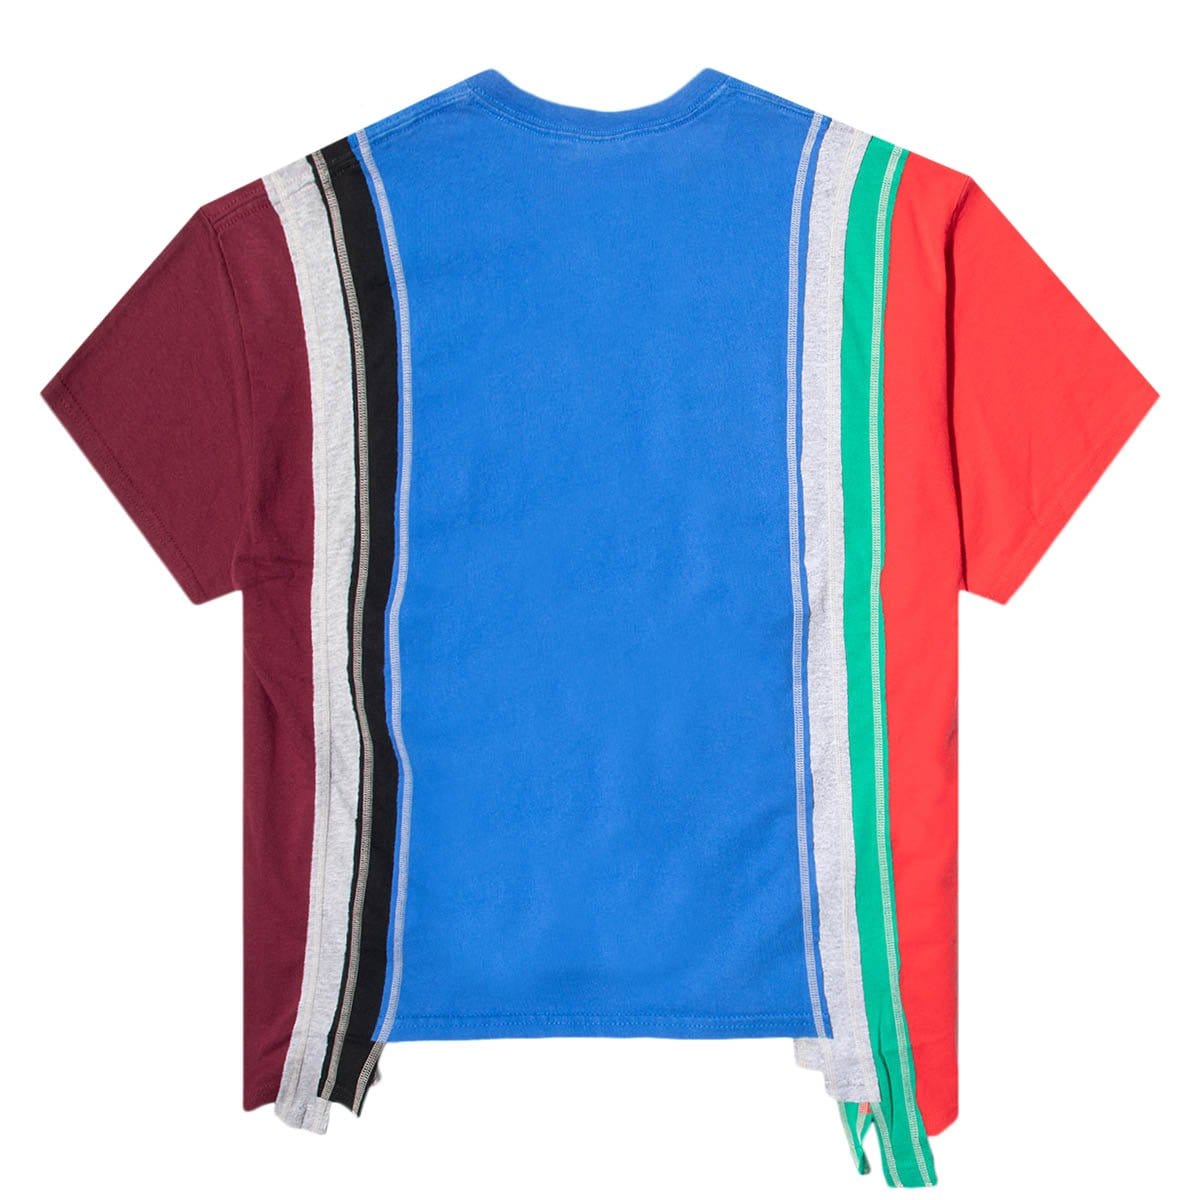 7 CUTS S/S TEE - COLLEGE FW20 96 Assorted – Bodega